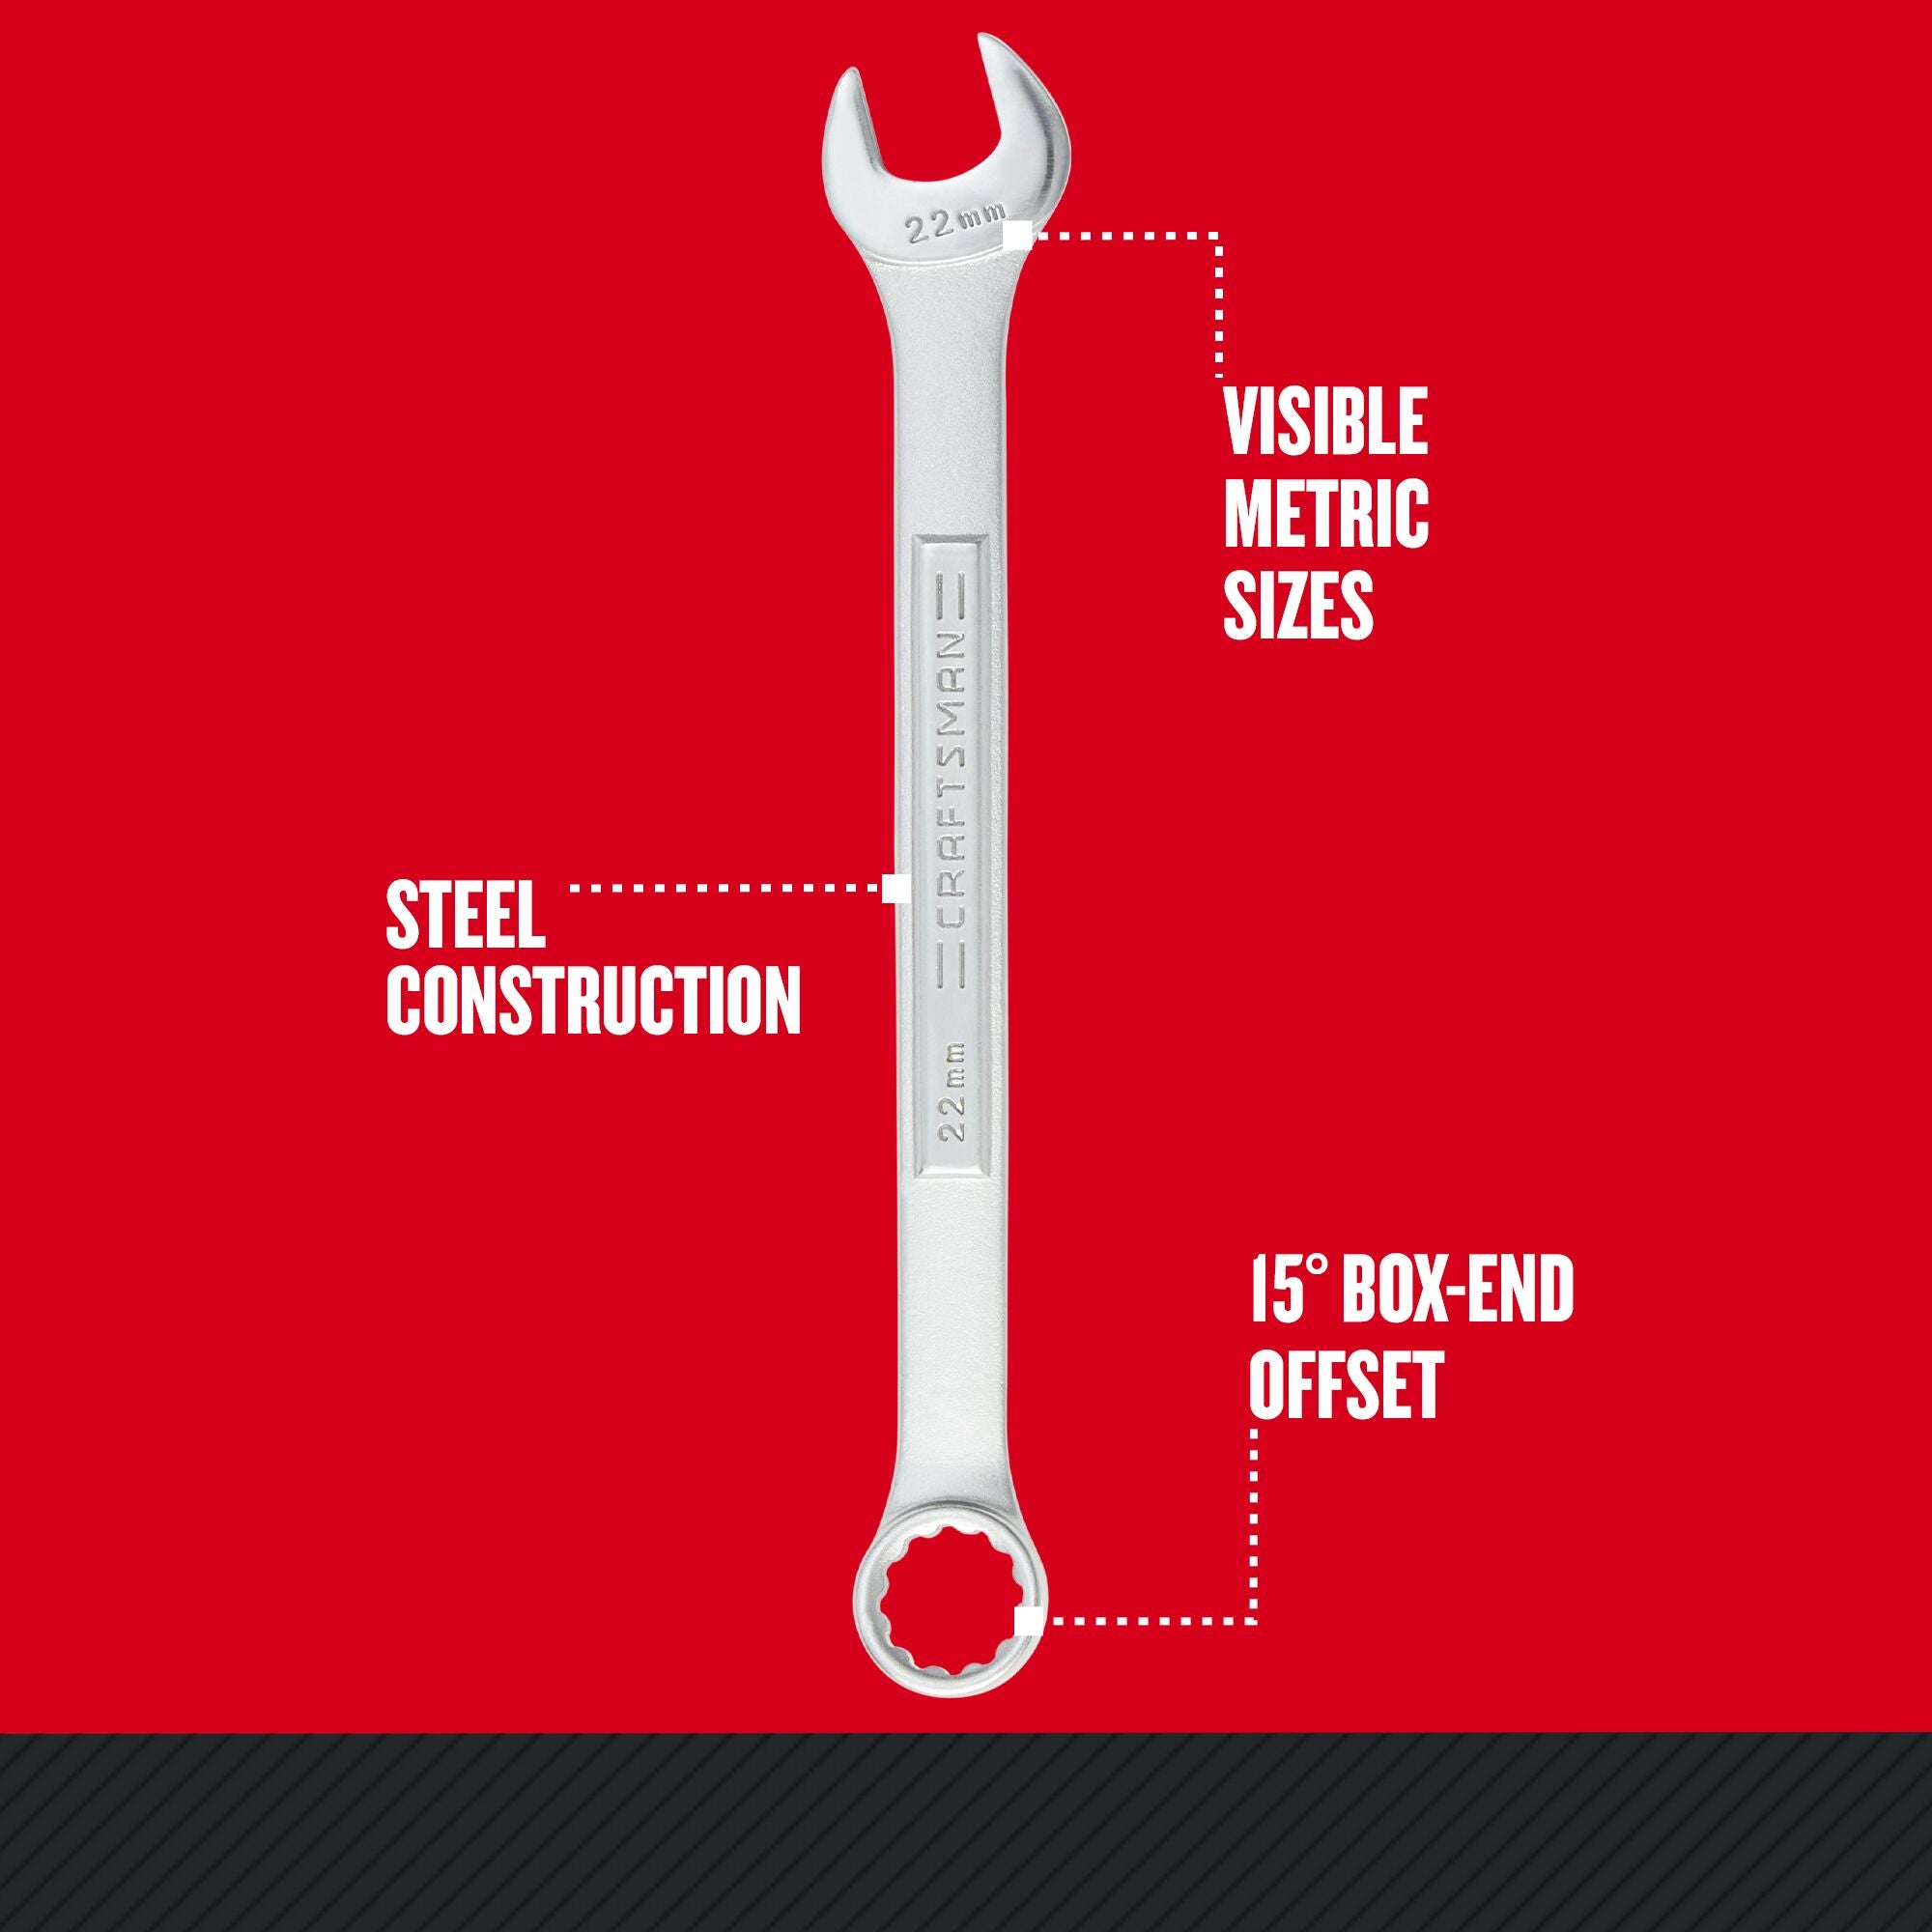 Front view of a single Craftsman Metric Combination Wrench showing steel construction, visible metric sizes and 15-degree box-end offset.